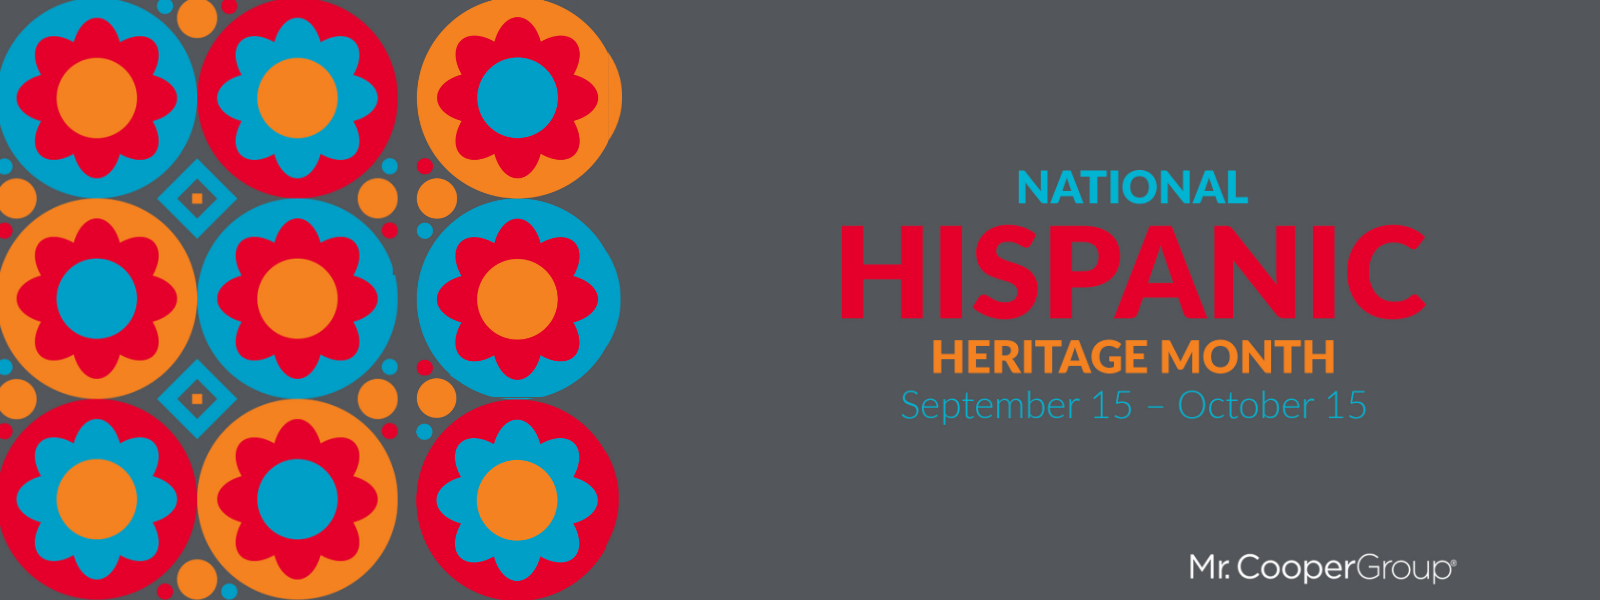 Dark gray box with colorful, graphic flower designs, the Mr. Cooper Group logo, and text: National Hispanic Heritage Month, September 15-October 15